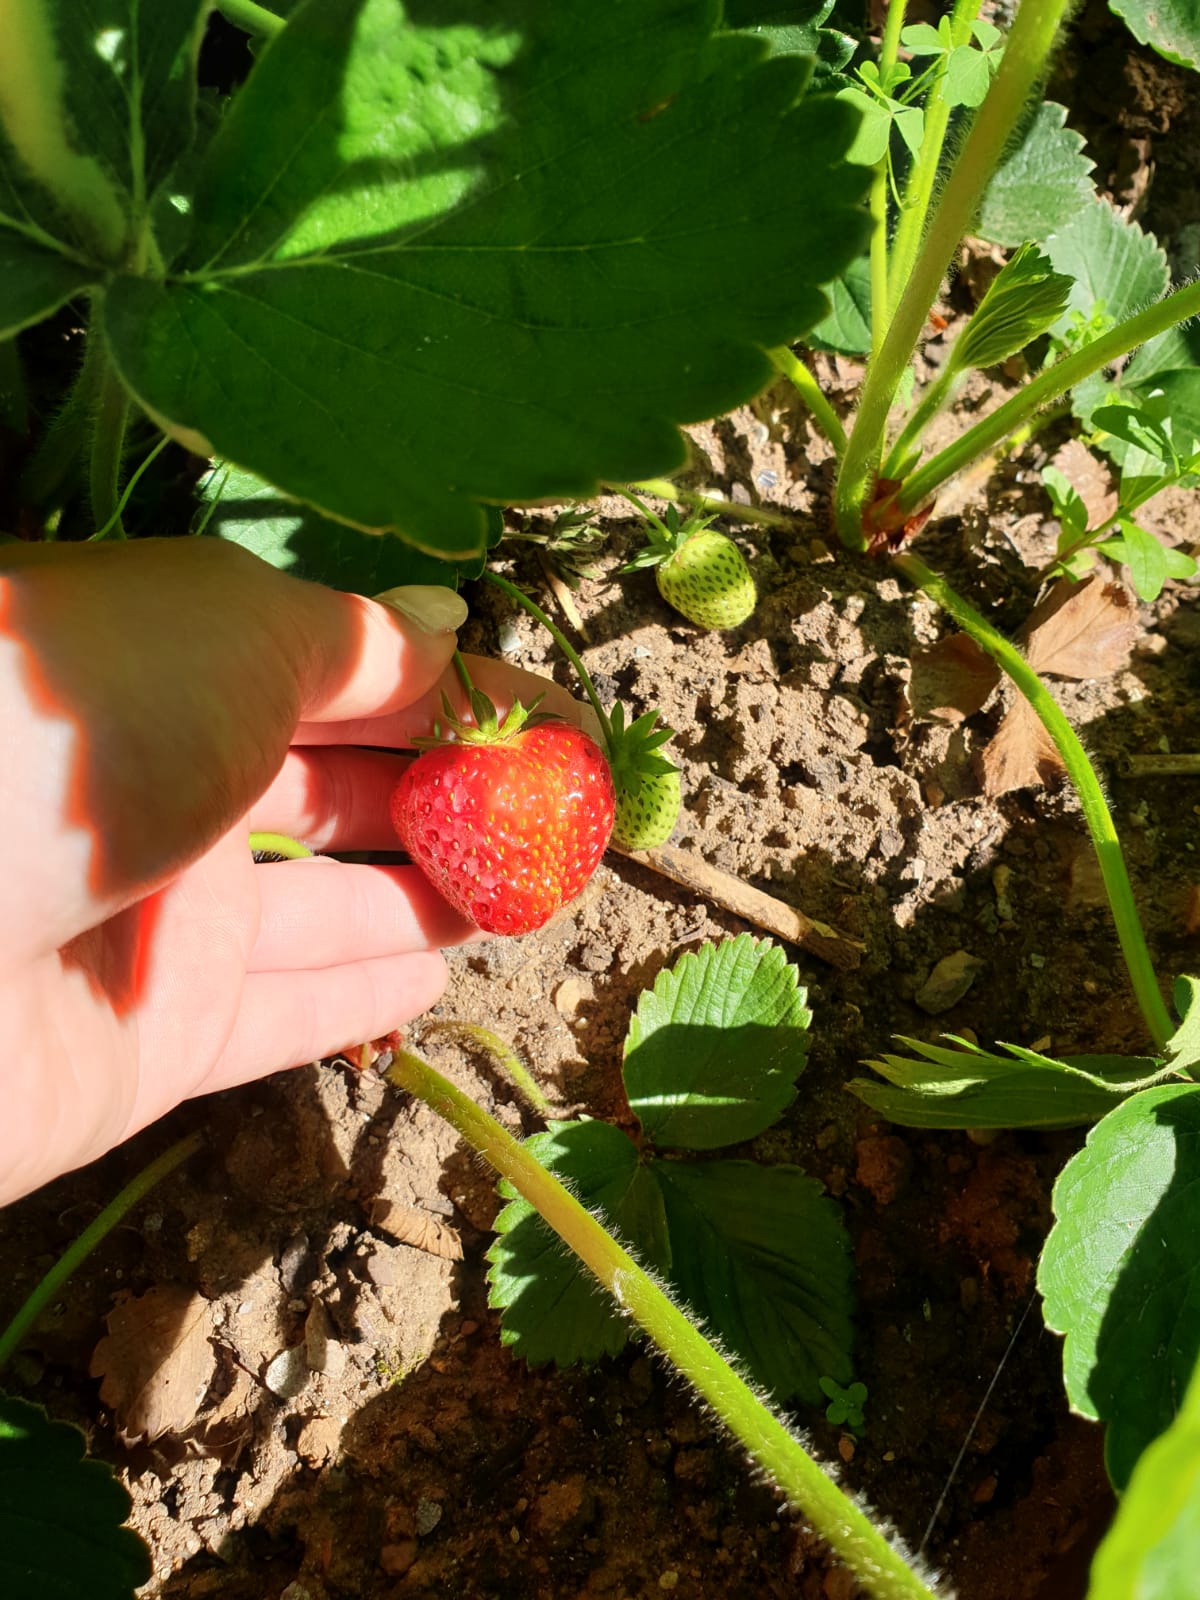 Homegrown strawberries at The Firs Nursing Home in Taunton